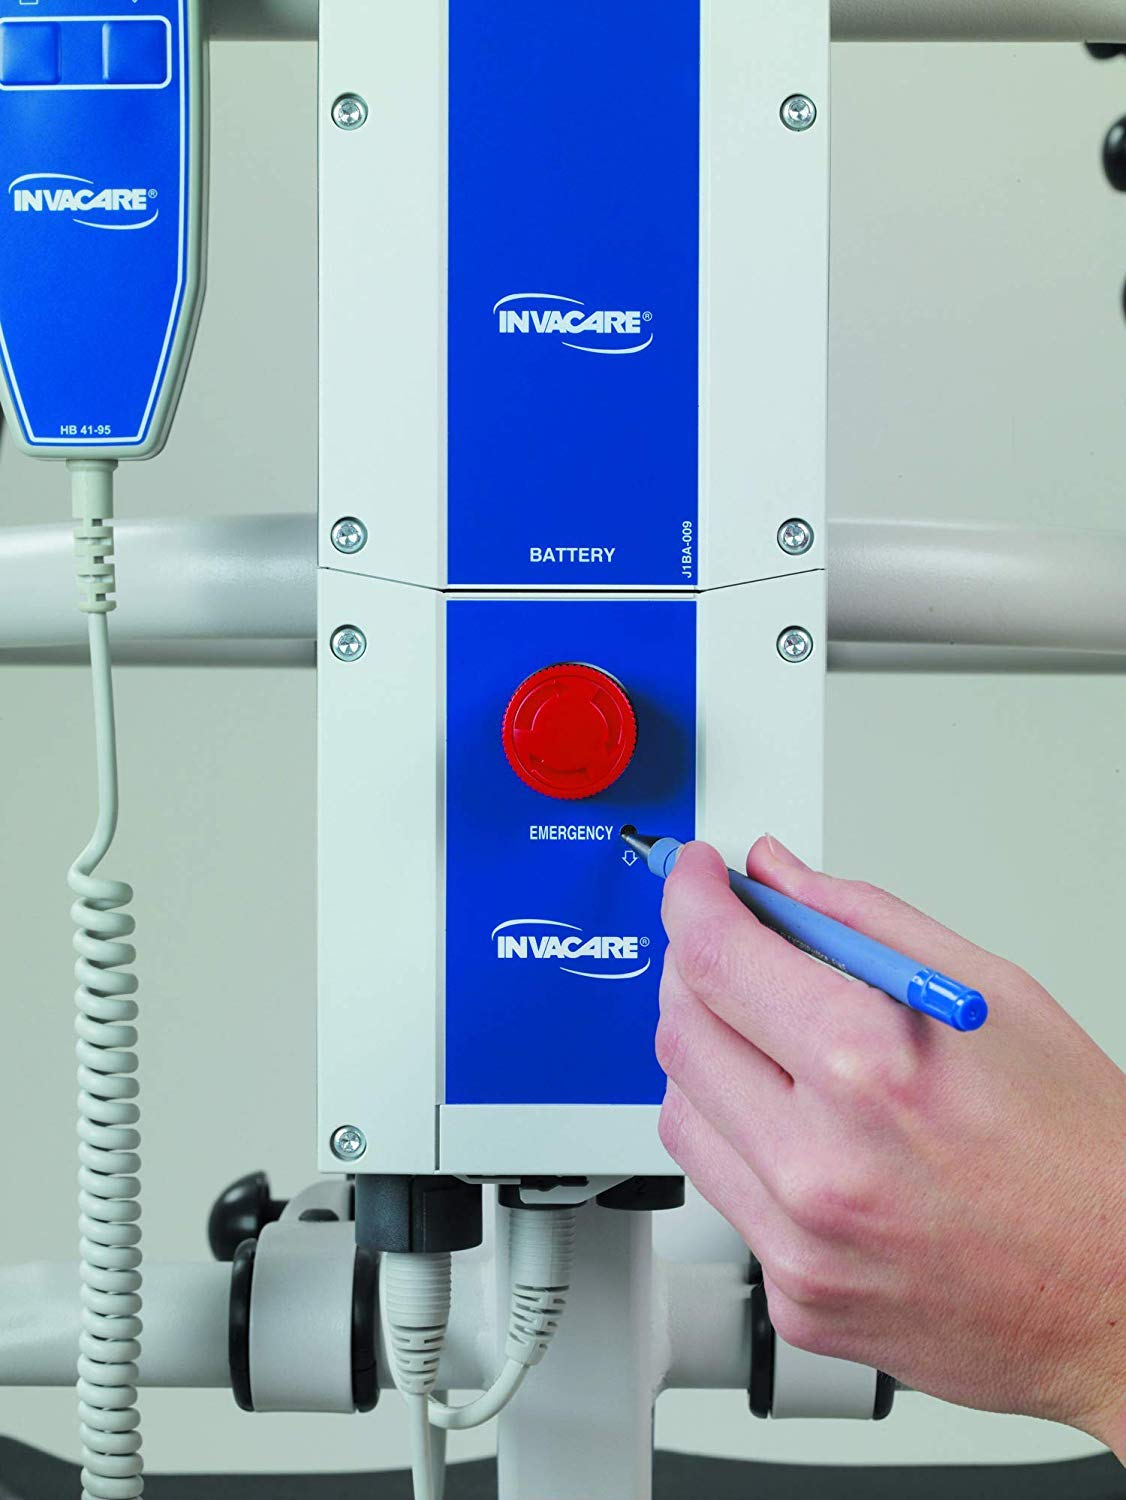 Close-up image of the removable battery with an emergency "OFF" button for Invacare's RPL450-1 Reliant Electric Patient lift against a white background.